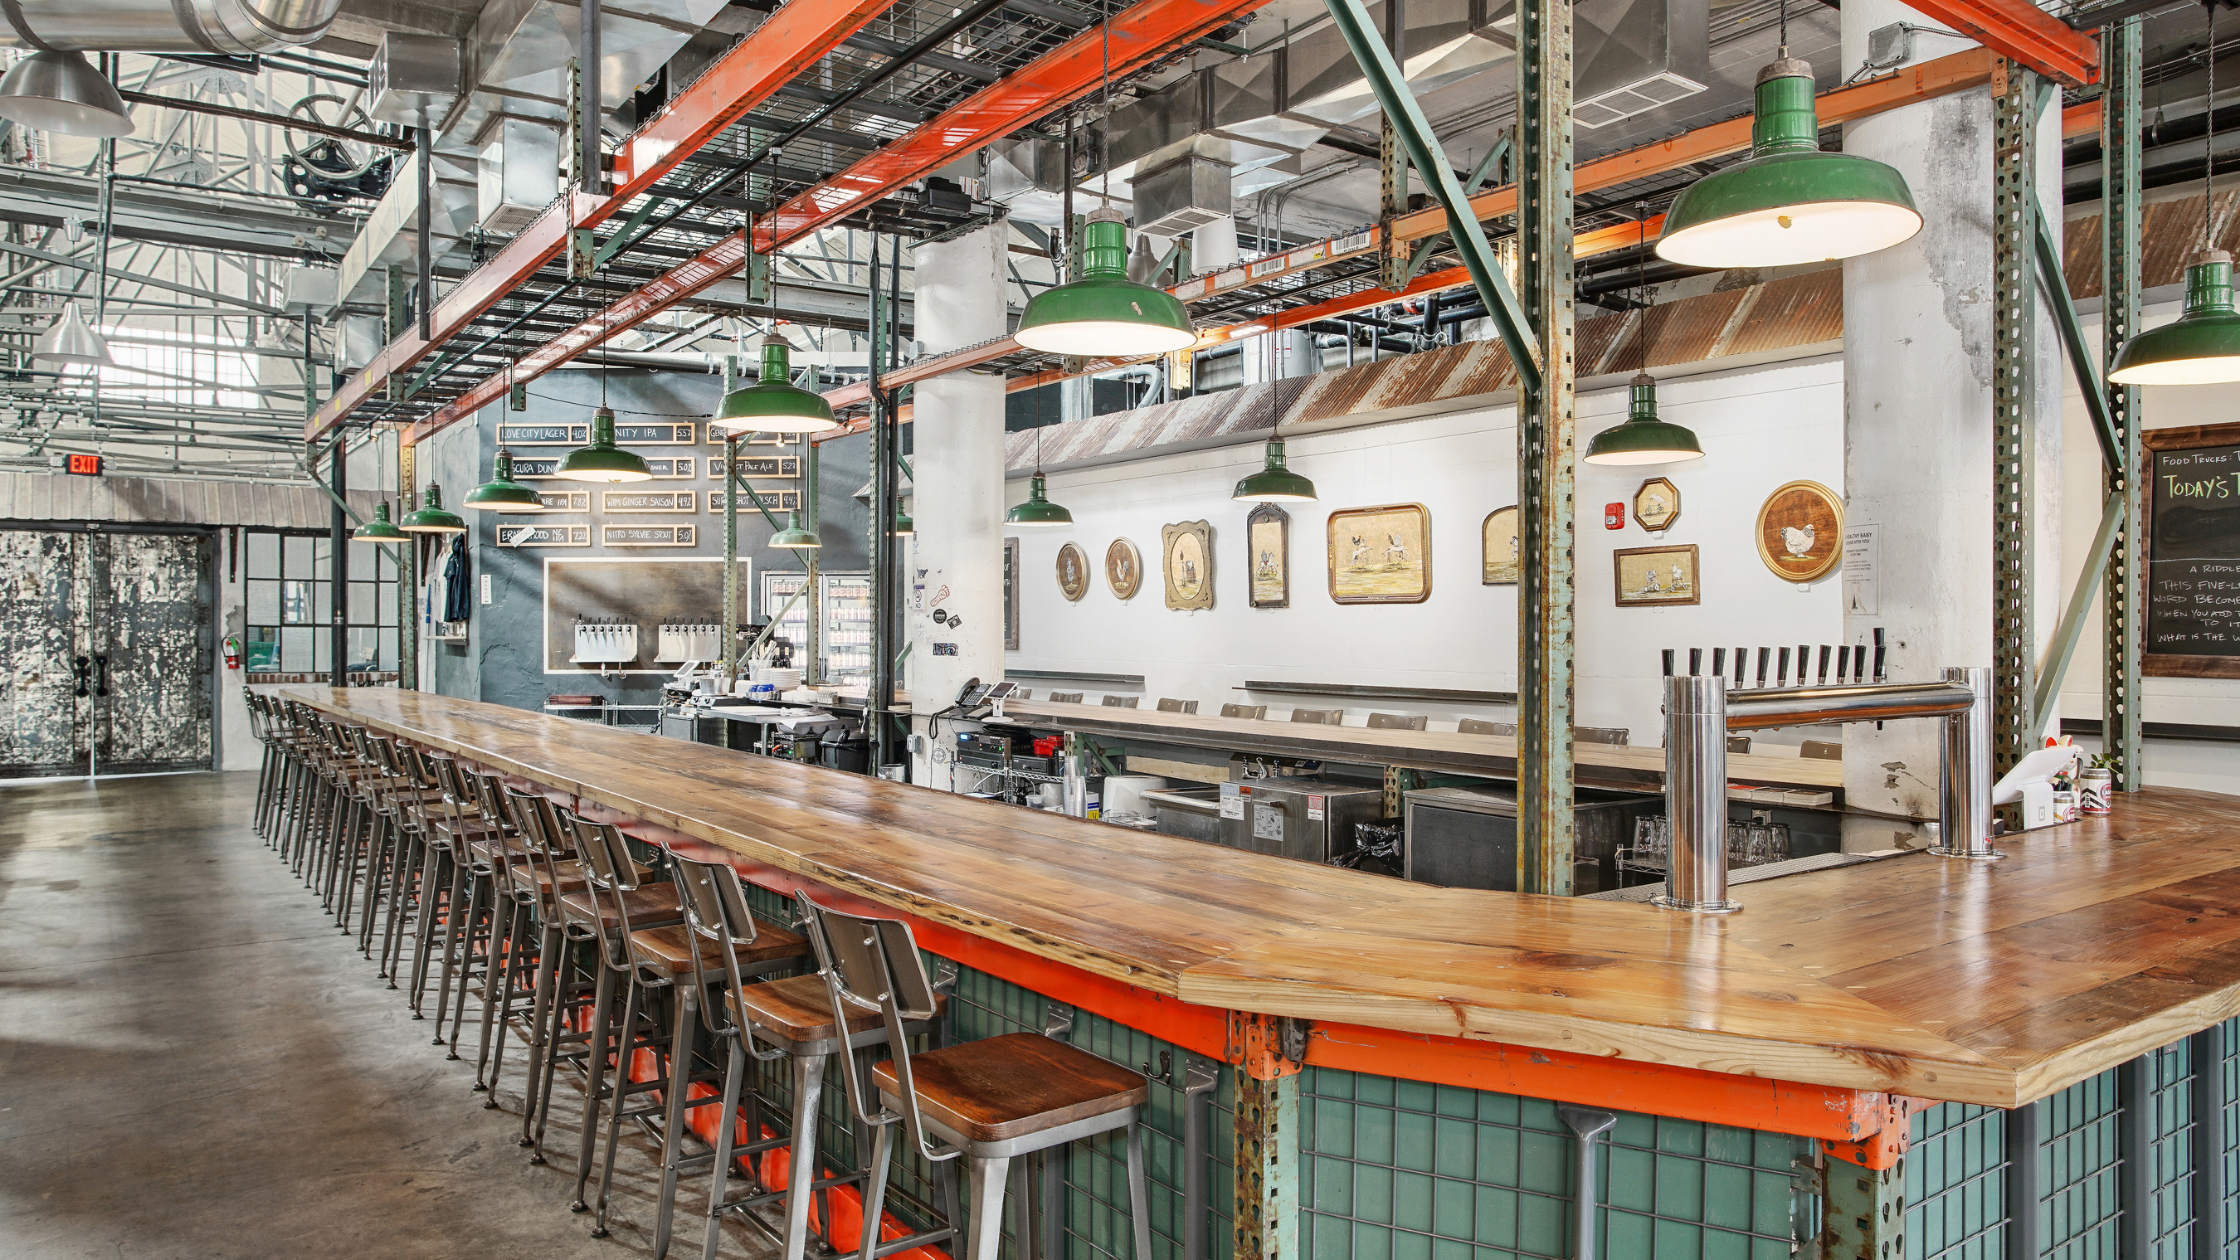  The Taproom at Love City Brewing features a large scale central U-shaped bar with industrial details.  